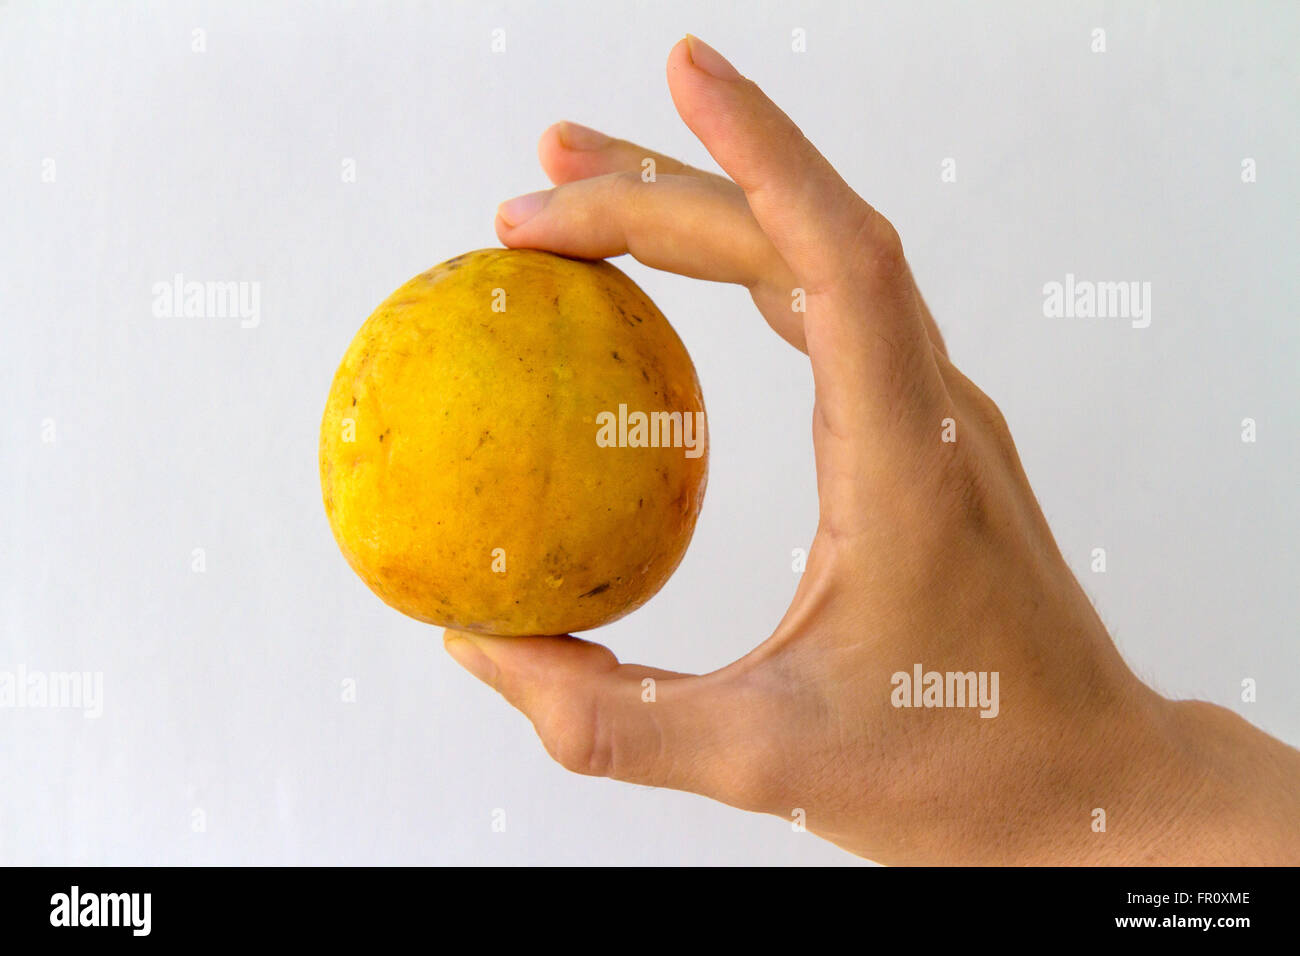 A whole guava fruit held in the hand of a young woman, isolated on white. Stock Photo